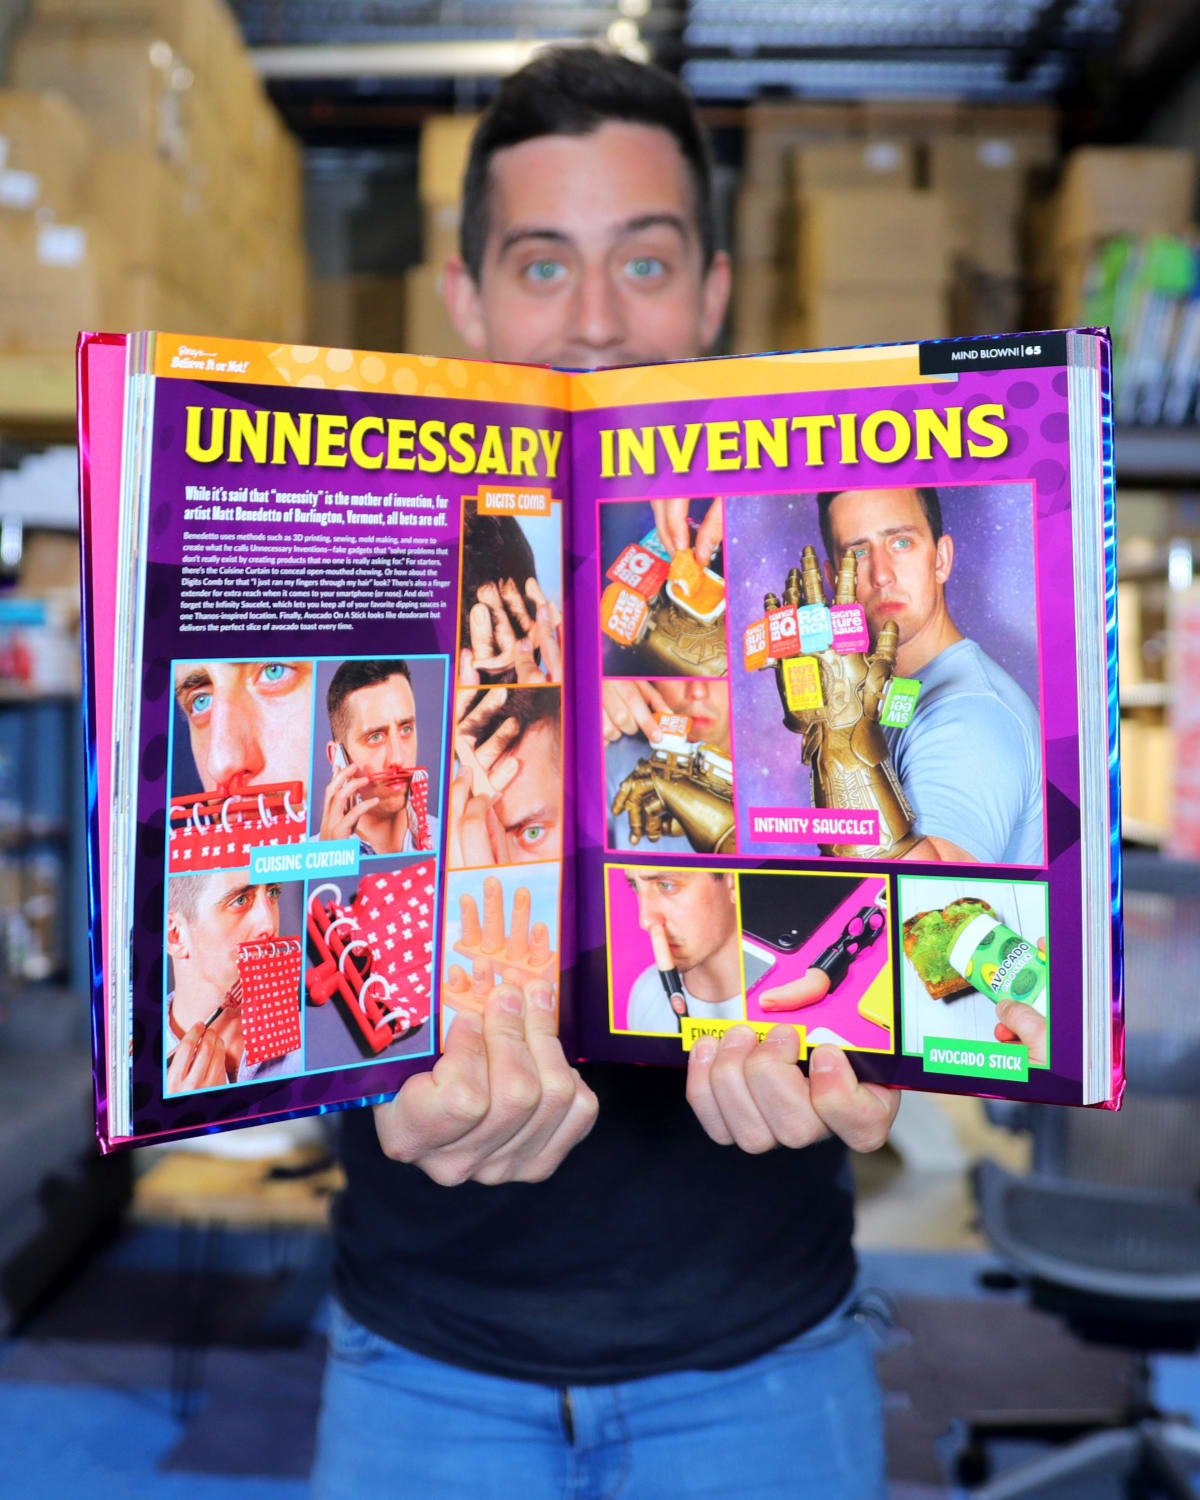 I just found out my fake inventions are the centerfold of the new Ripley's Believe It or Not book